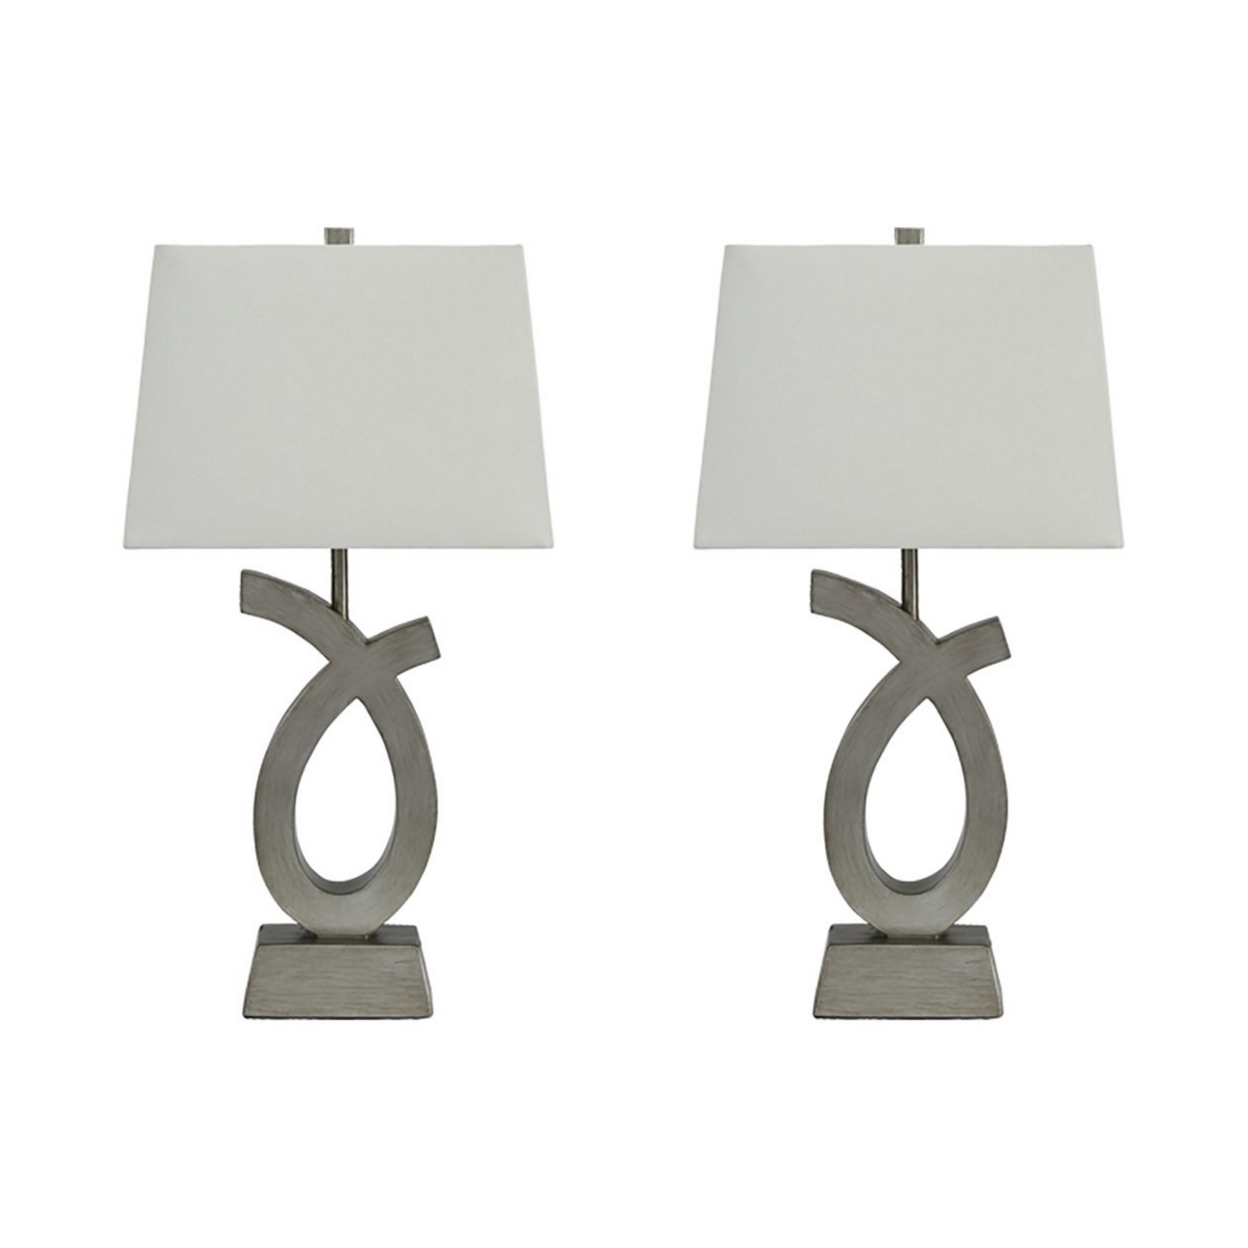 Scrolled Resin Table Lamp With Rectangular Shade, Set Of 2, Gray And White- Saltoro Sherpi